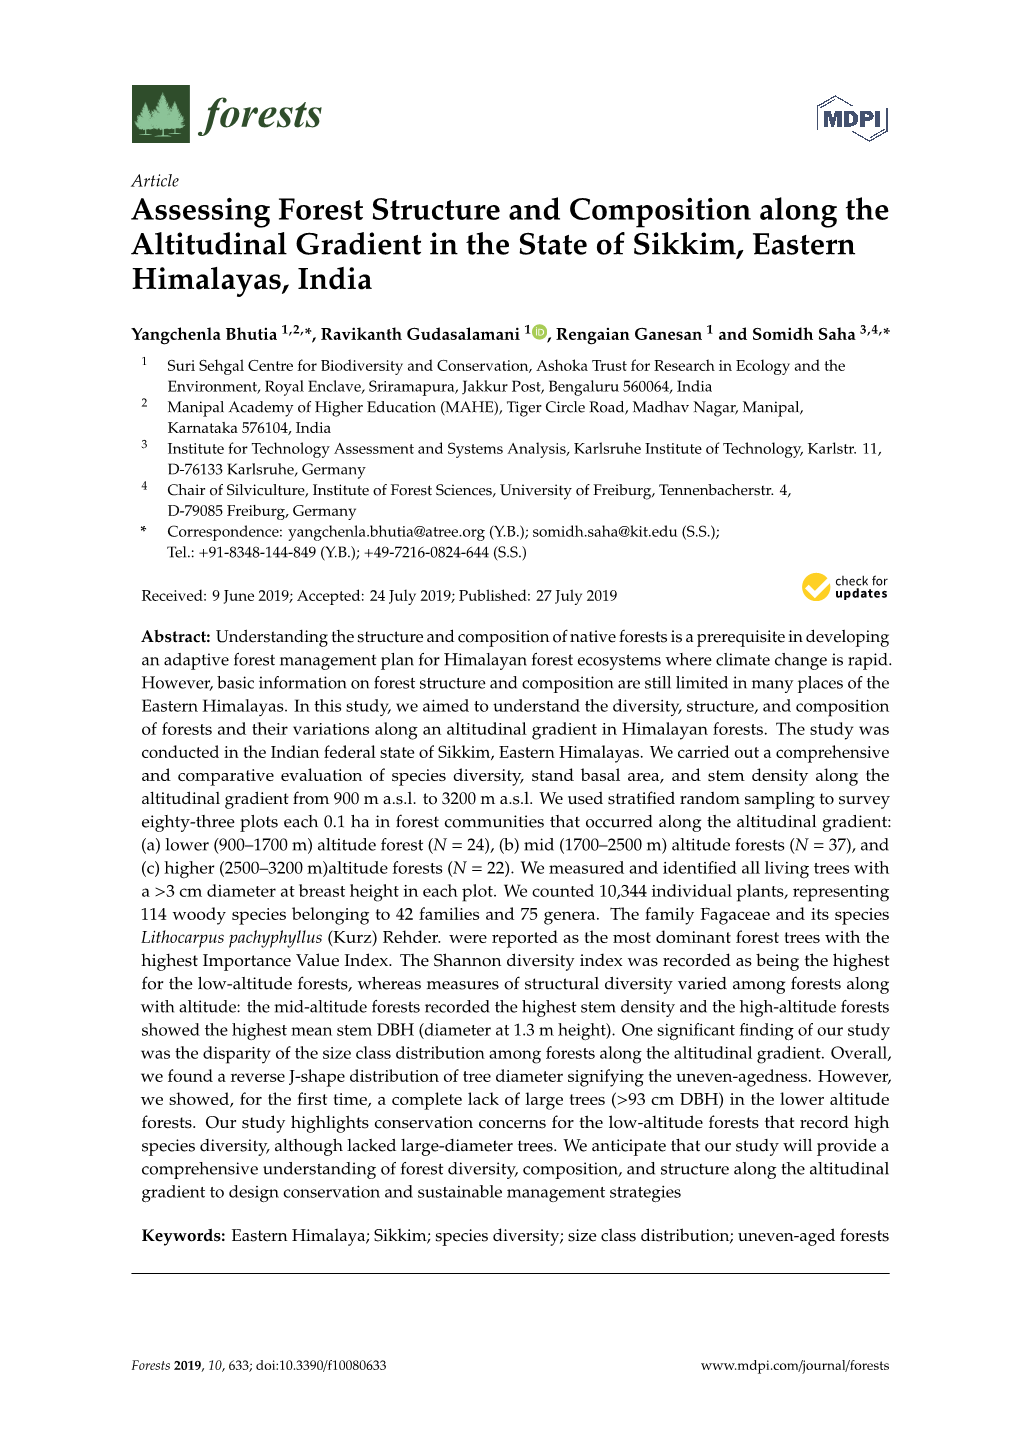 Assessing Forest Structure and Composition Along the Altitudinal Gradient in the State of Sikkim, Eastern Himalayas, India